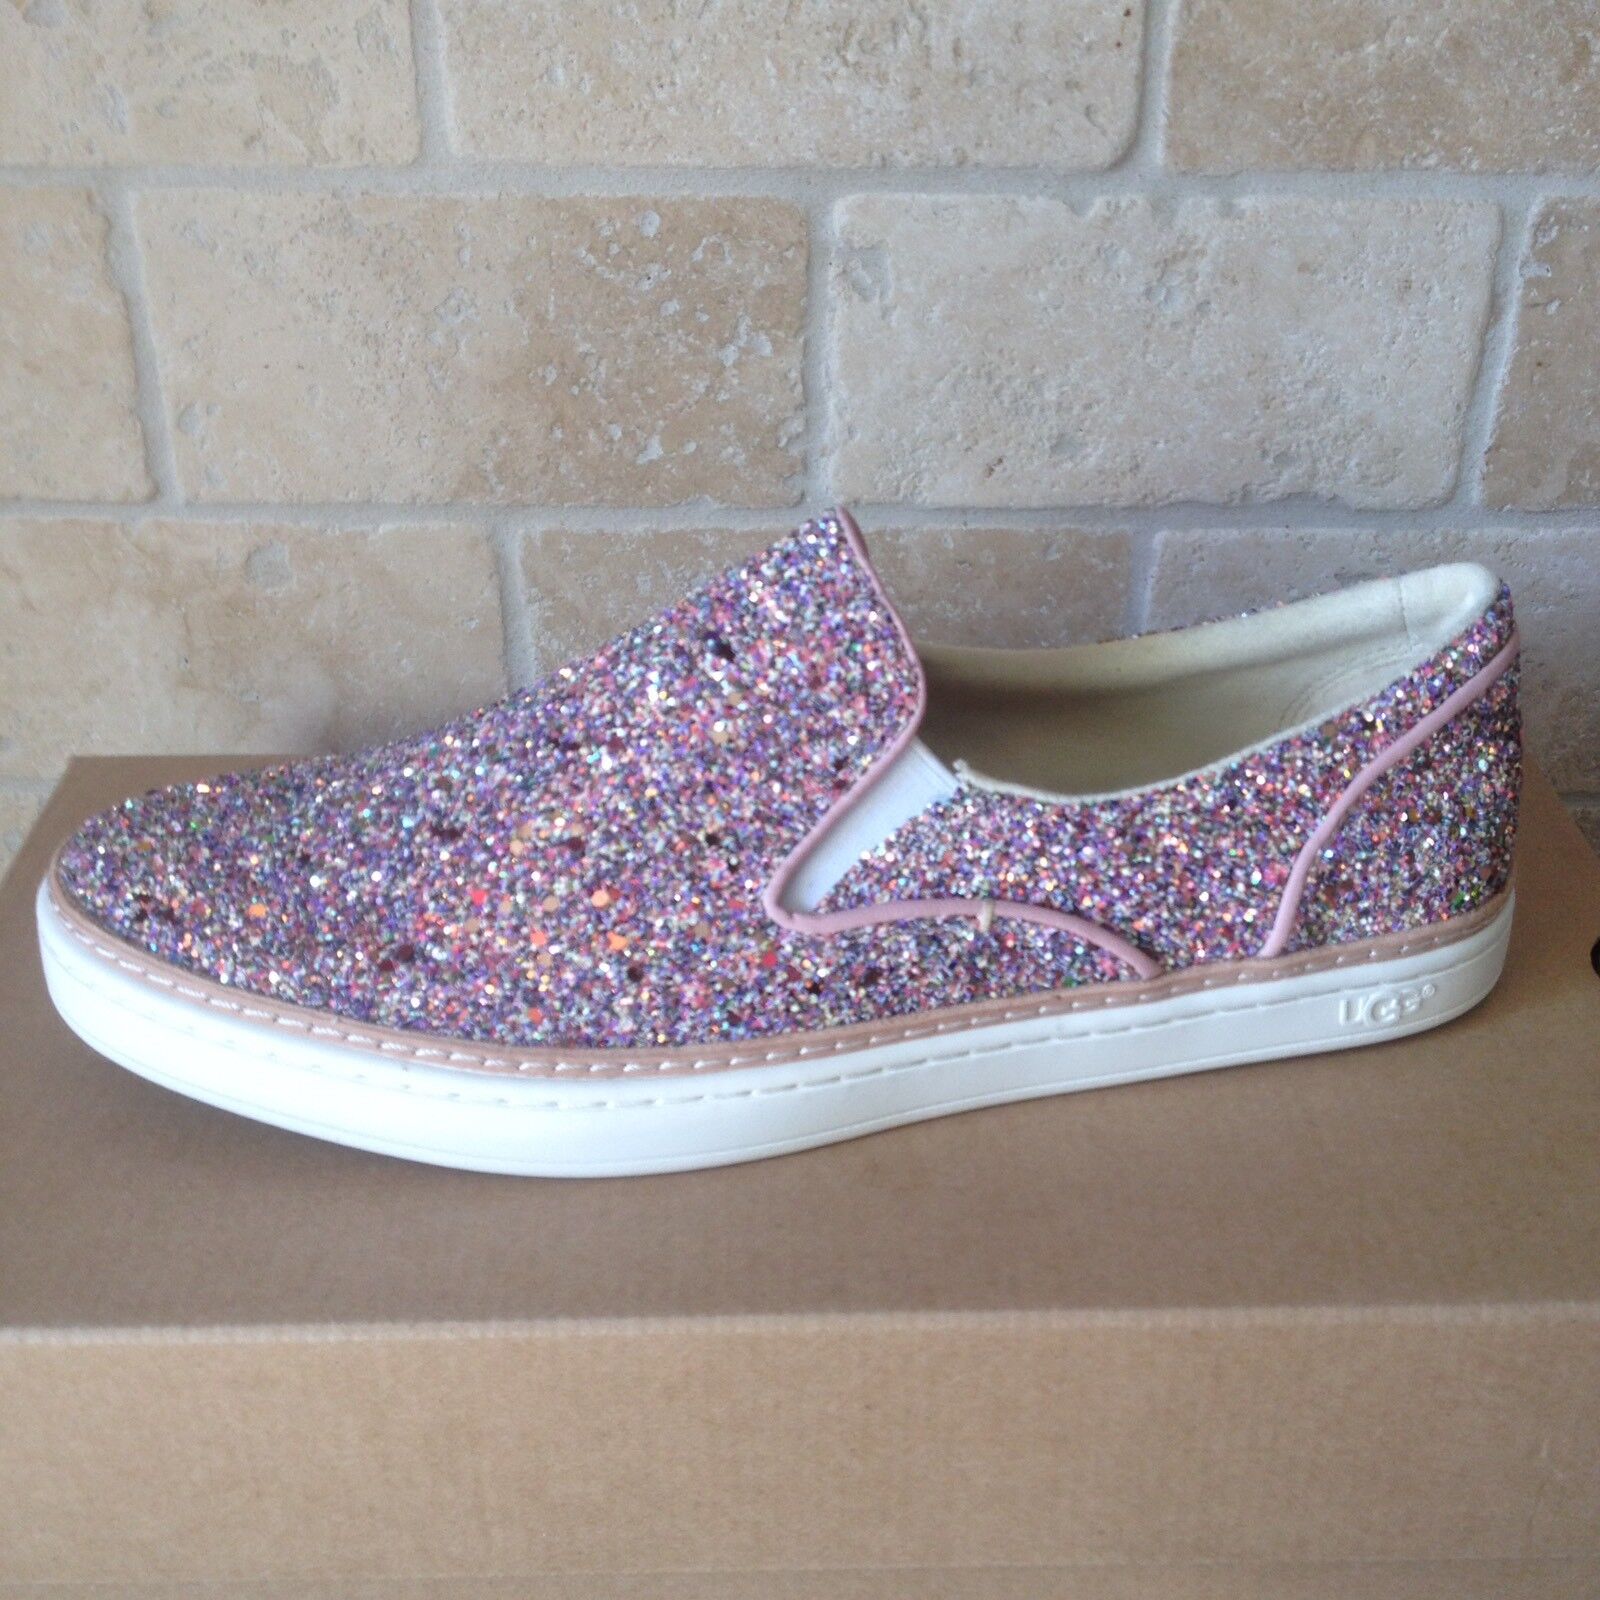 UGG ADLEY CHUNKY GLITTER CONFETTI PINK LEATHER SLIP-ON SHOES SIZE 